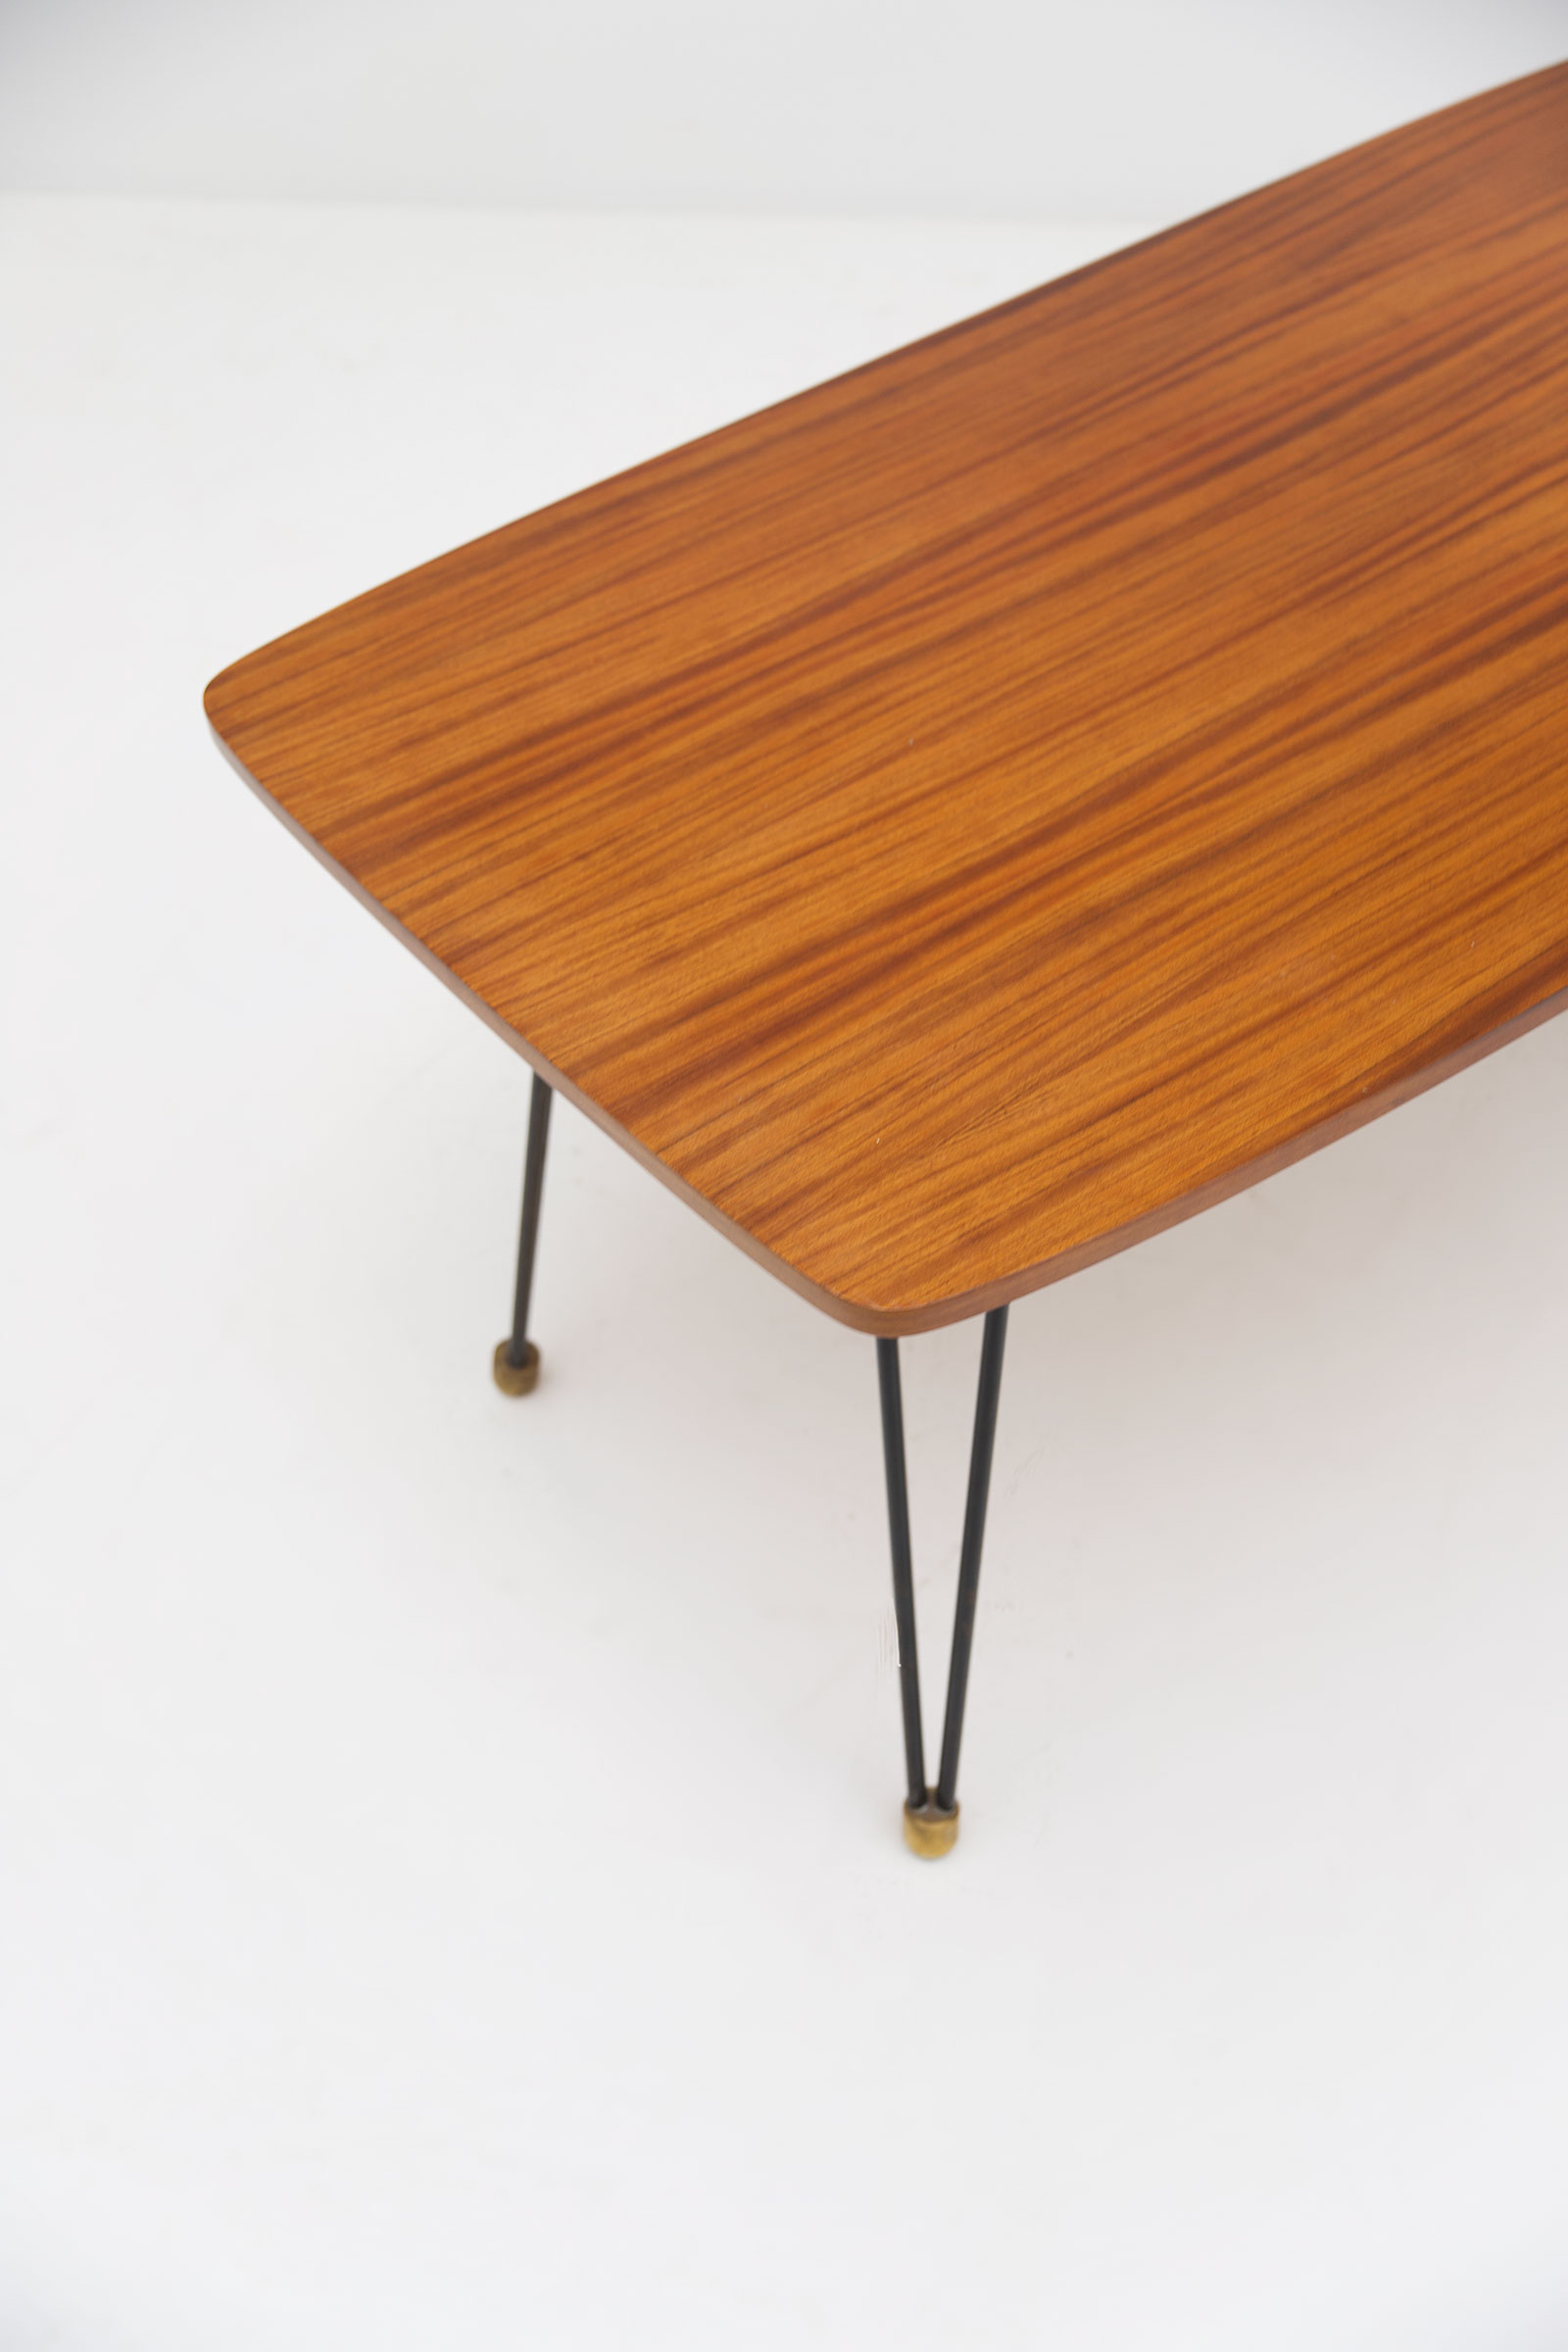 Alfred Hendrickx T3 dining table 50simage 4